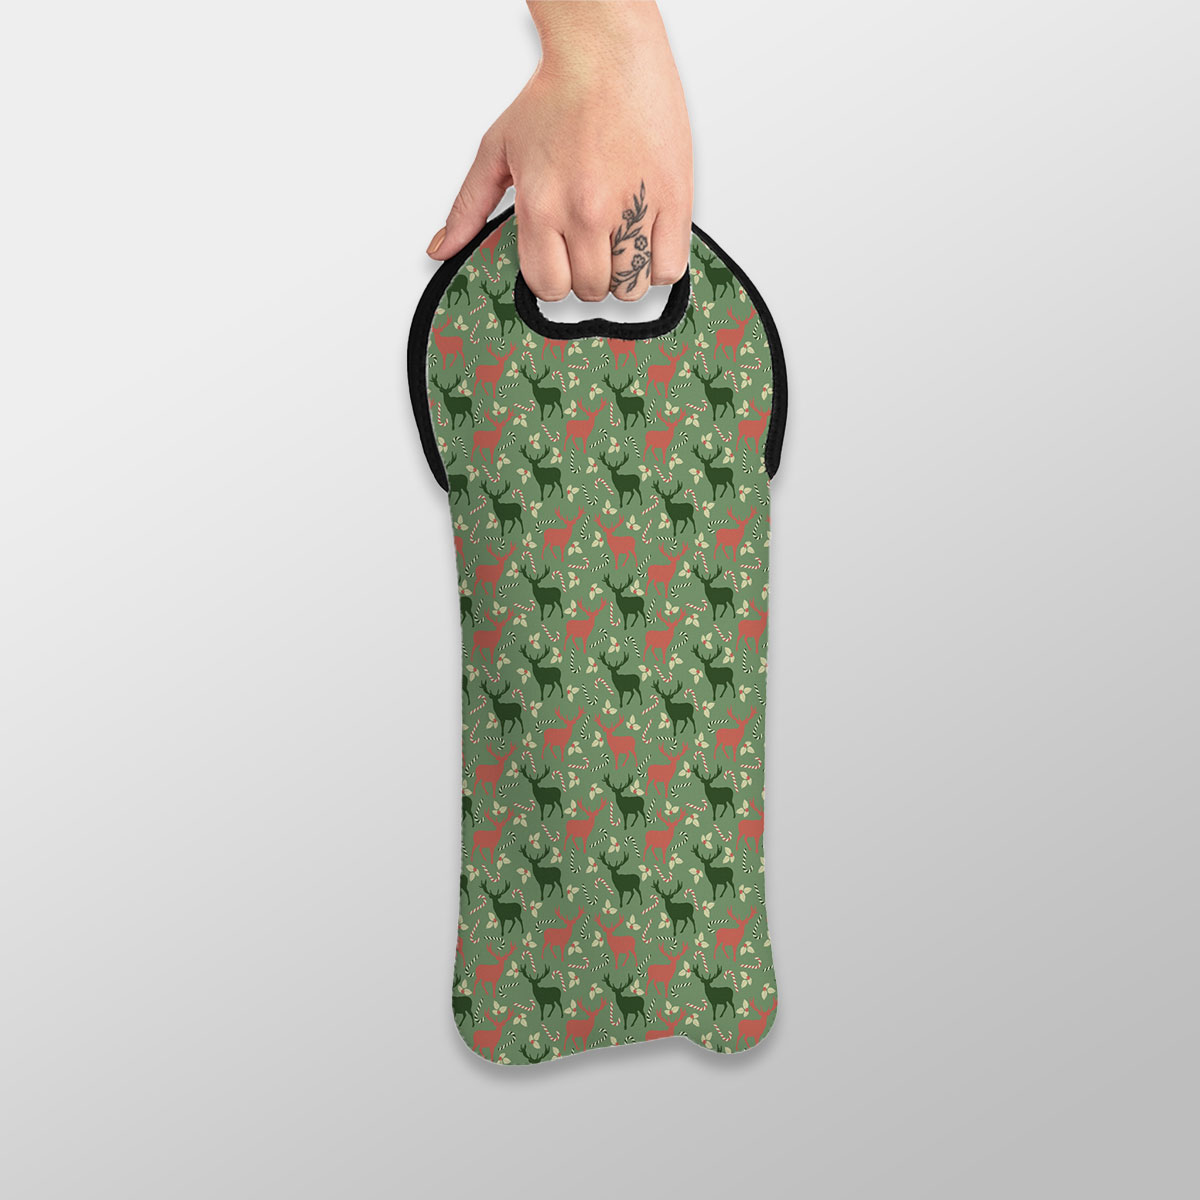 Reindeer, Christmas Flowers And Candy Canes Wine Tote Bag